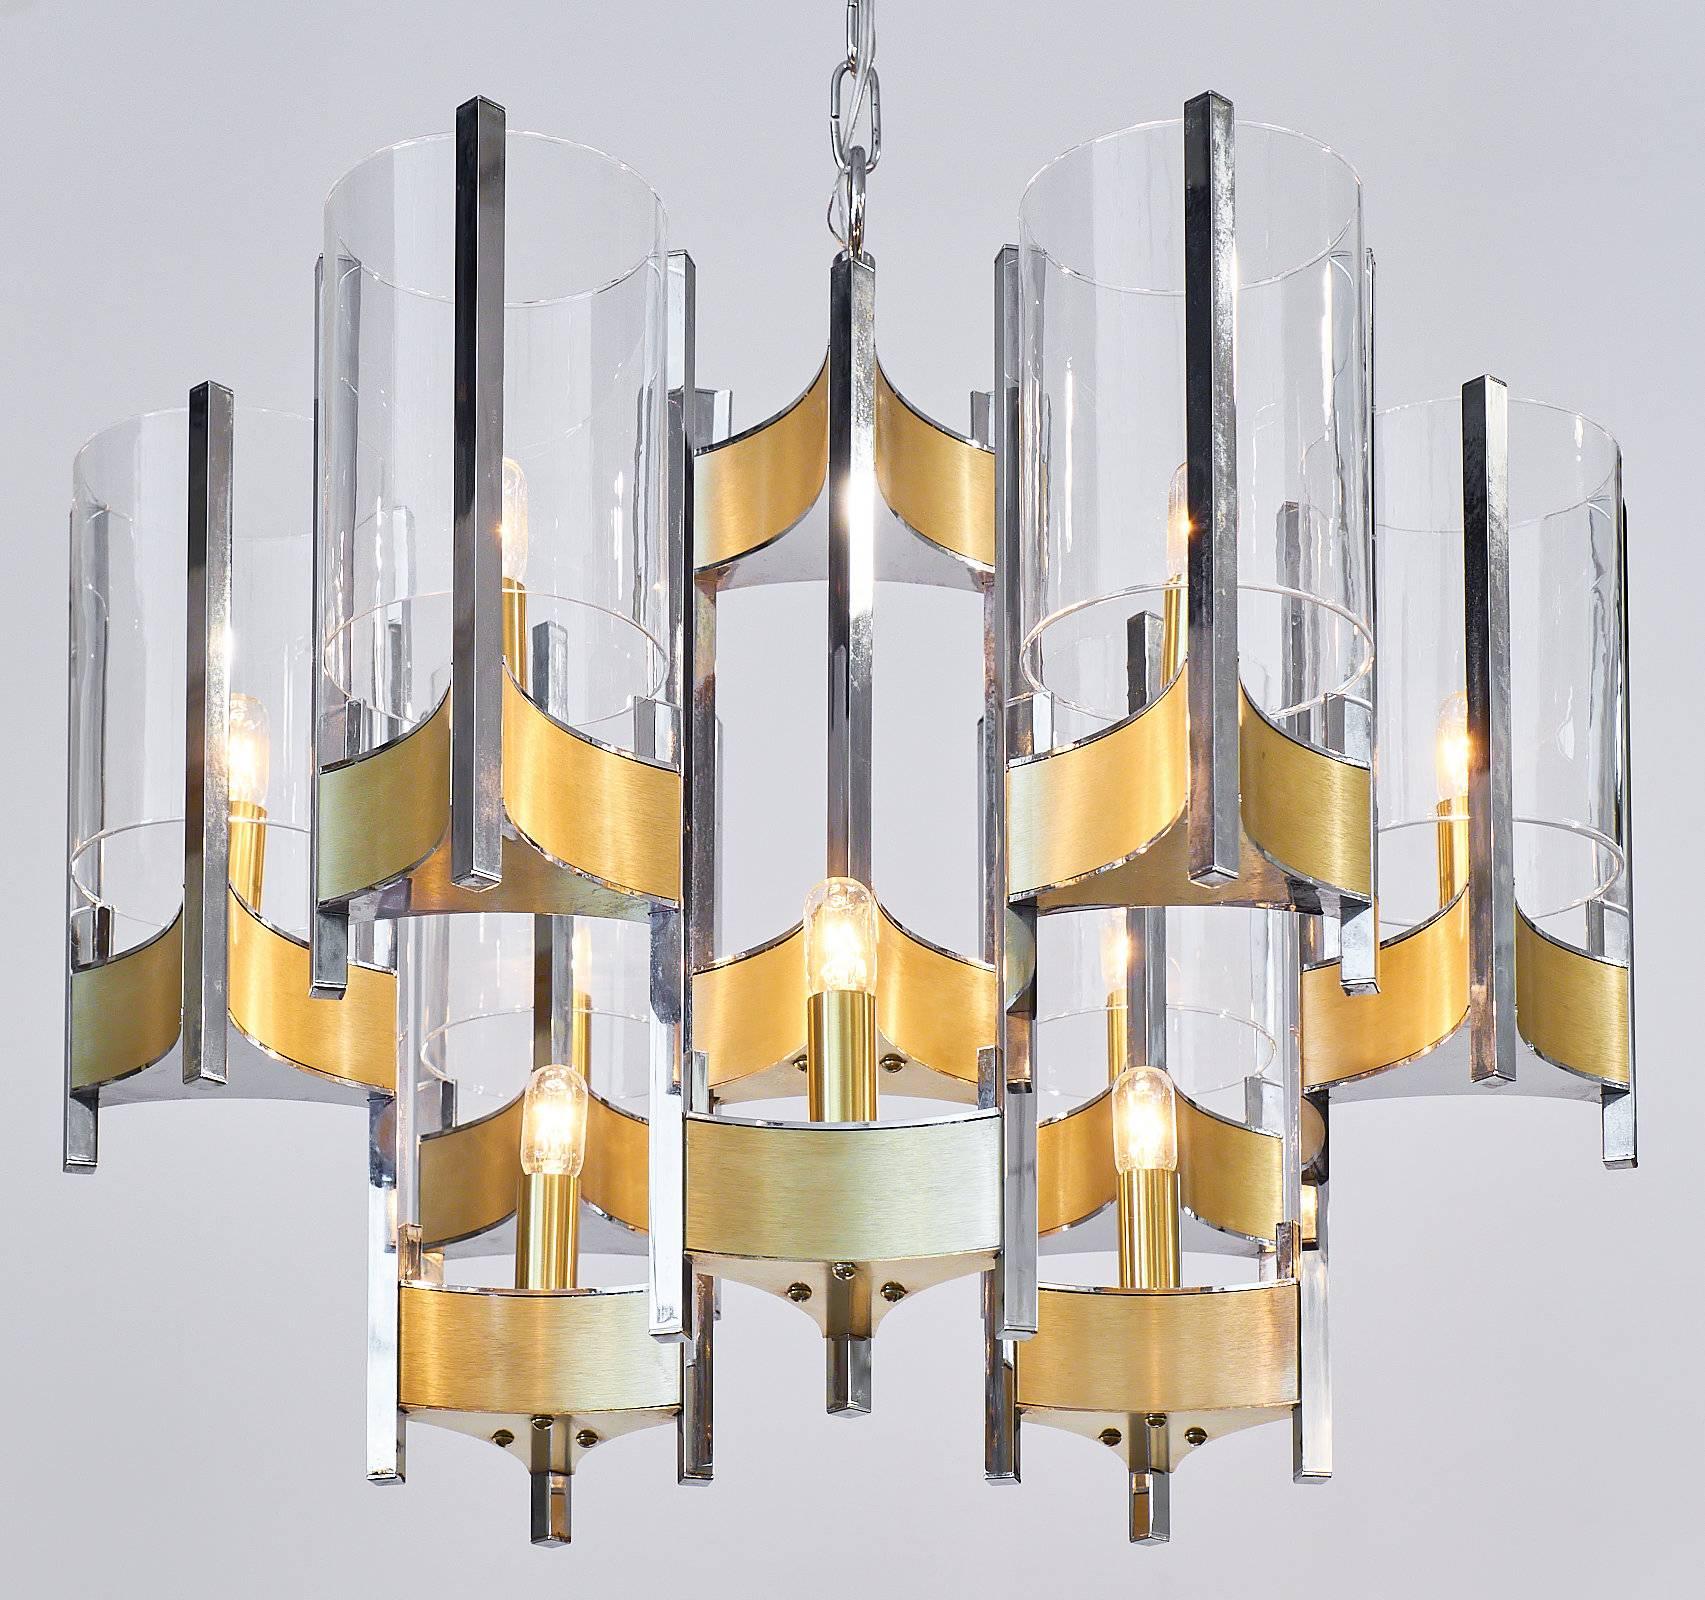 Acquired in Lyon, the south of France, this stunning chandelier is in the Structuralist manner, known more commonly in the US as Postmodern. Made of brass and chrome in geometric, spatial configurations create beauty while also functionally